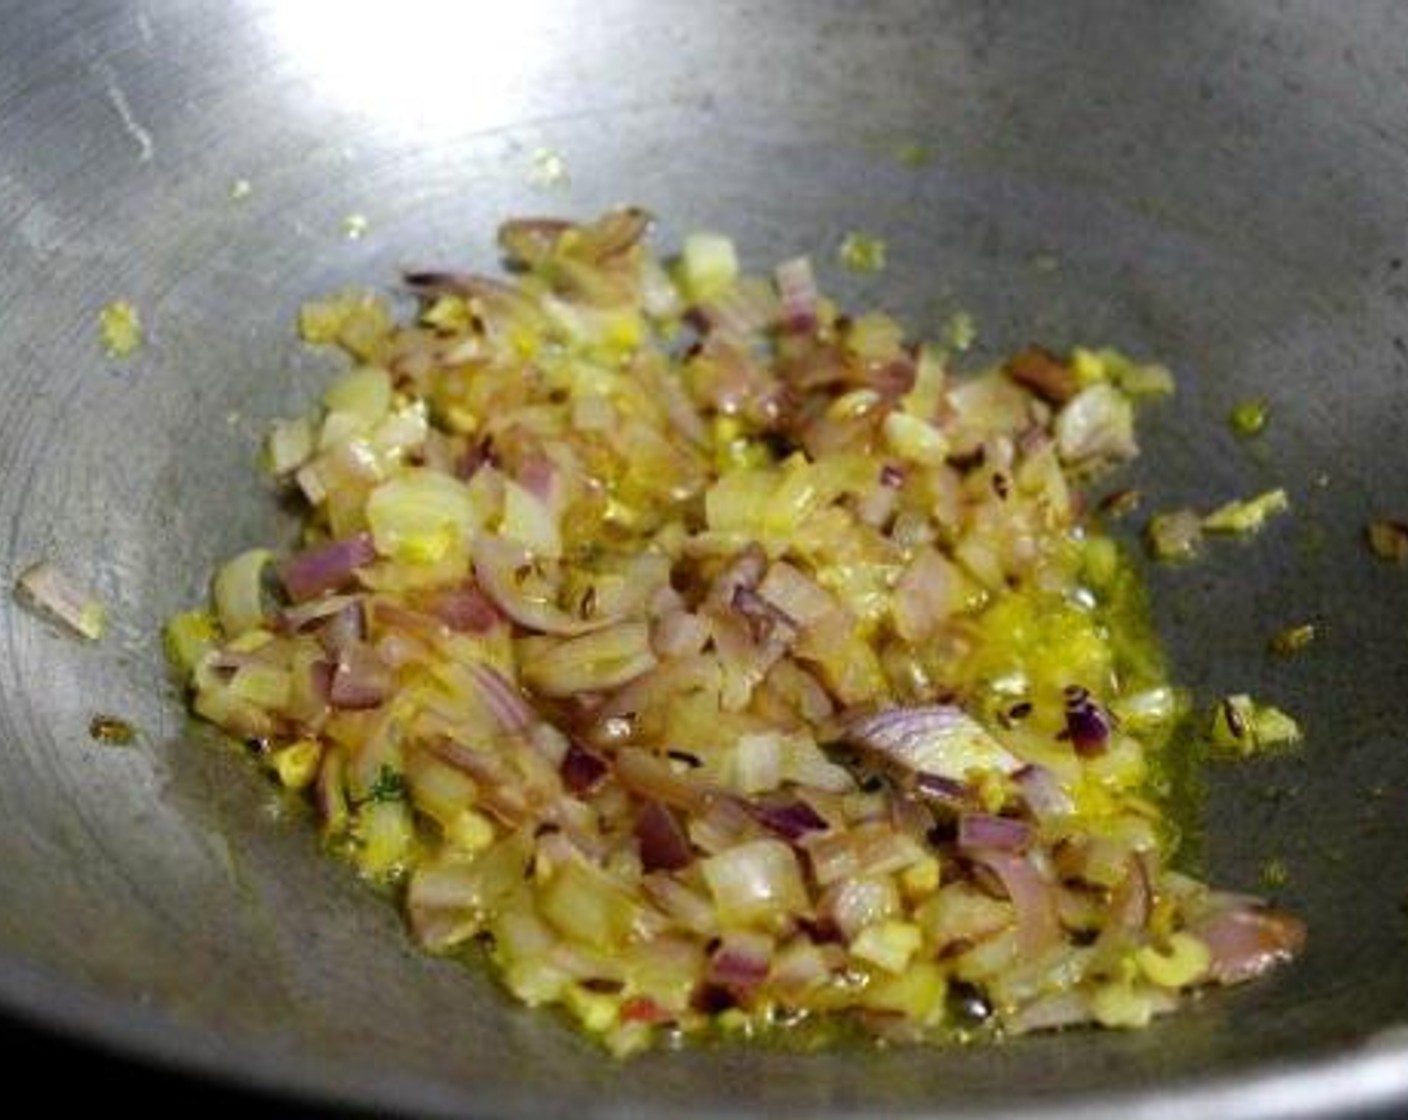 step 6 Heat Oil (1 Tbsp) in a pan and season with Cumin Seeds (1/2 tsp) and let it crackle. Add onions and chopped Garlic (6 cloves) and cook over medium flame till it becomes translucent.